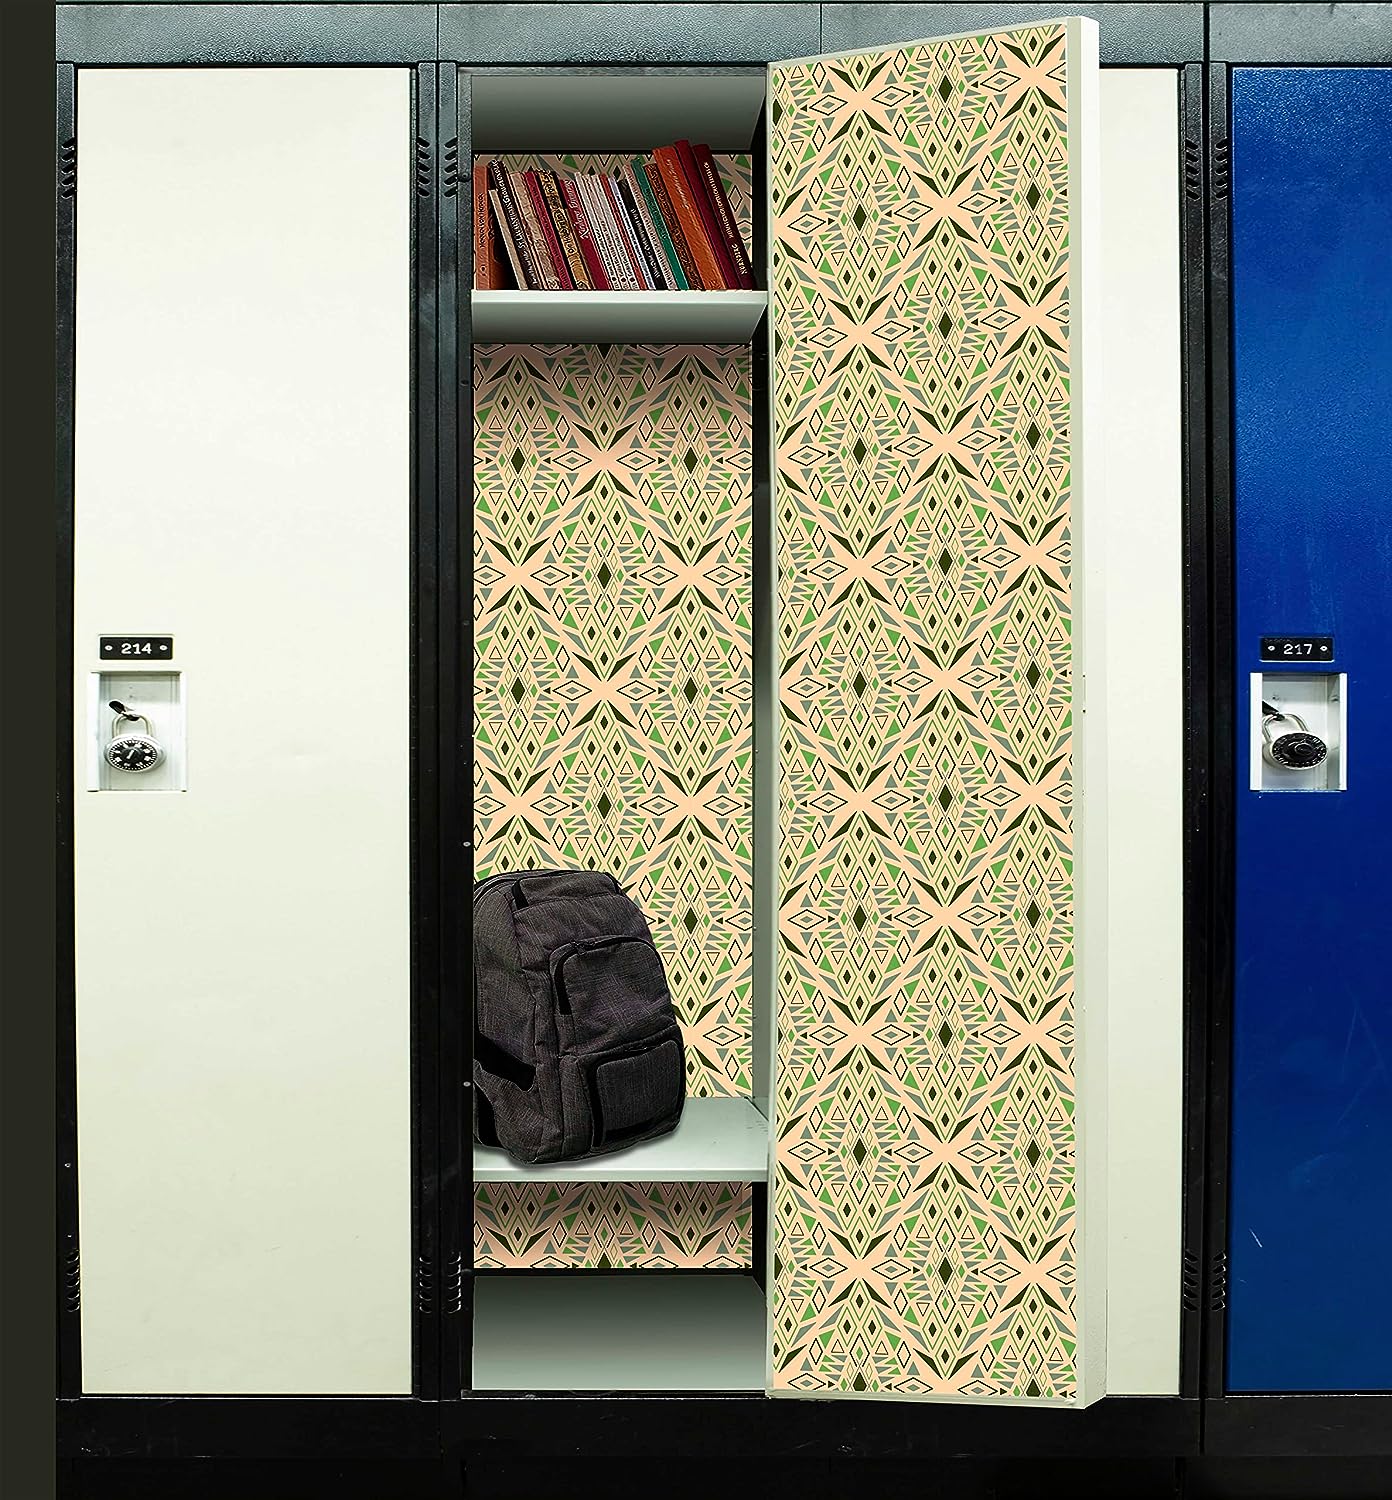 PELICAN INDUSTRIAL Magnetic Locker Wallpaper (Full Sheet Magnetic) - Trimmable, Easy Install, Remove & Reuse - Pack of 3 Sheets - Geometric Pattern (vb046)